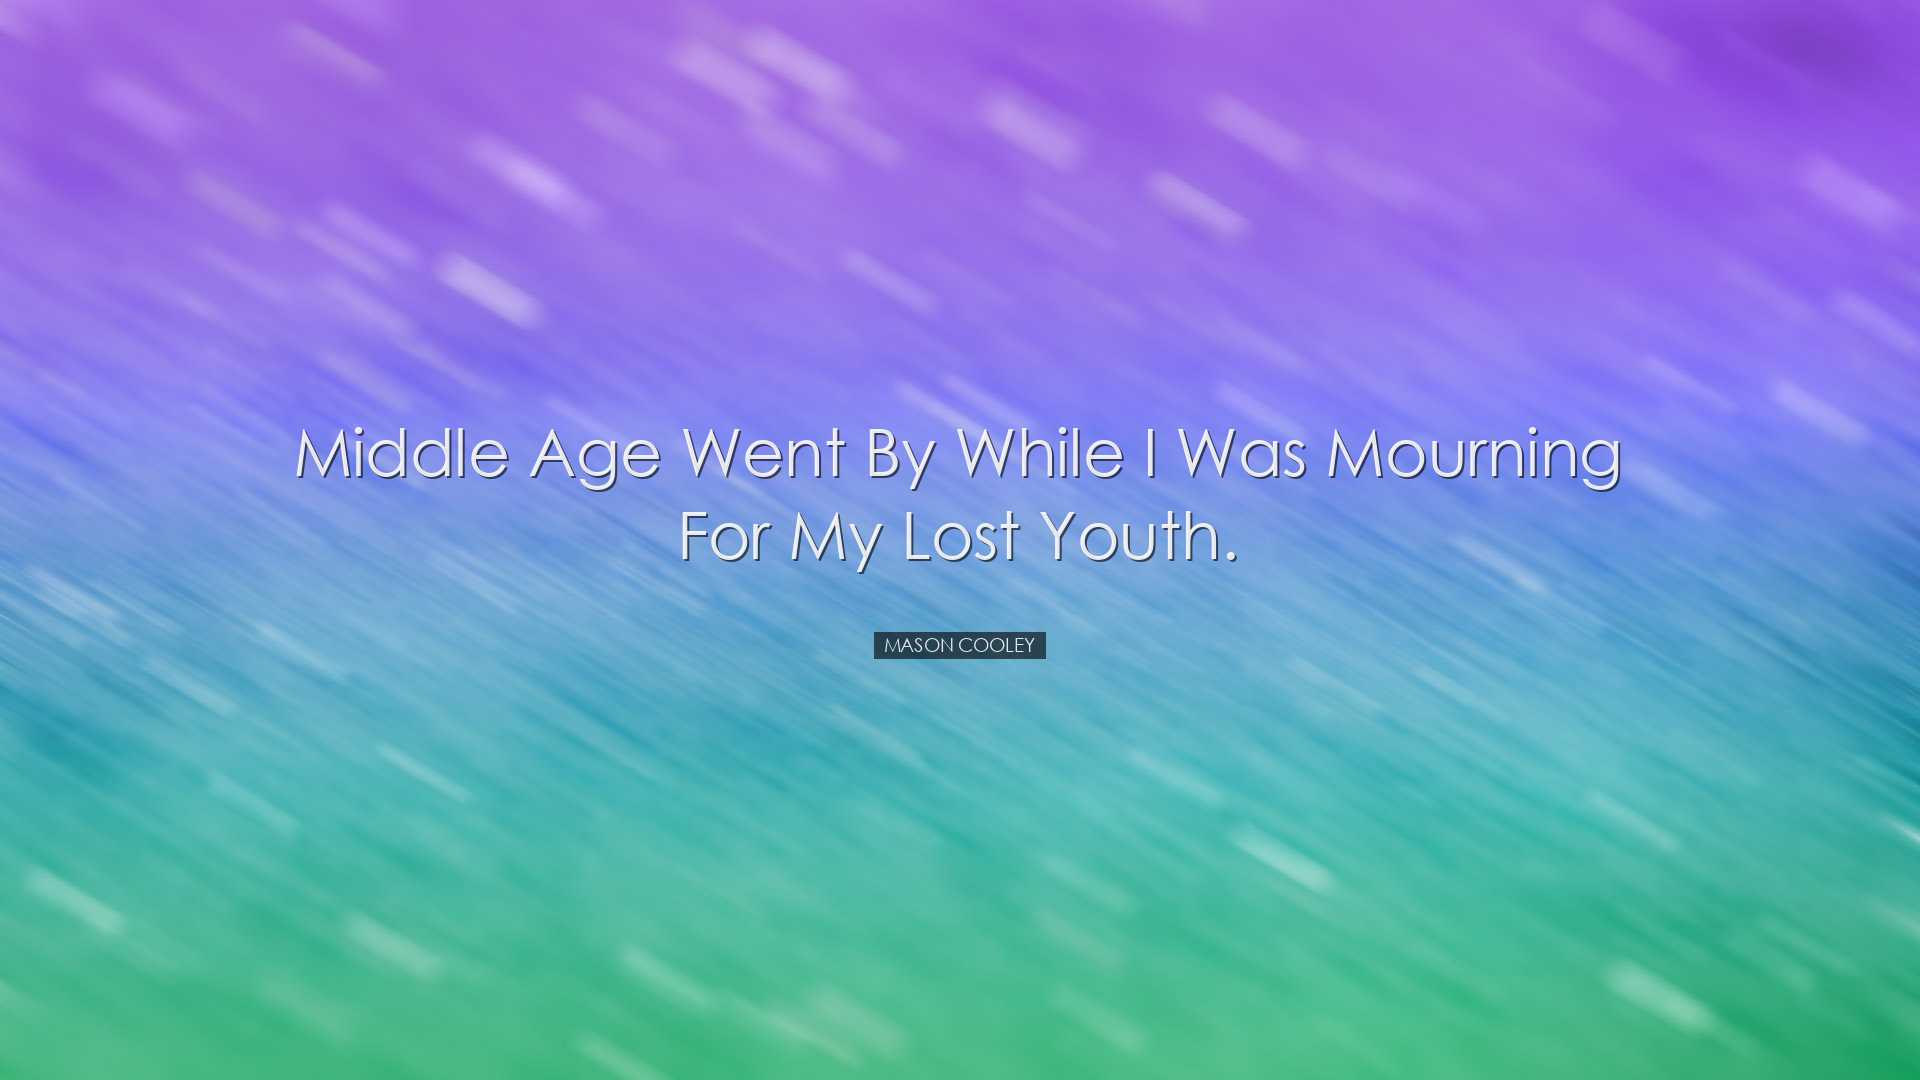 Middle age went by while I was mourning for my lost youth. - Mason